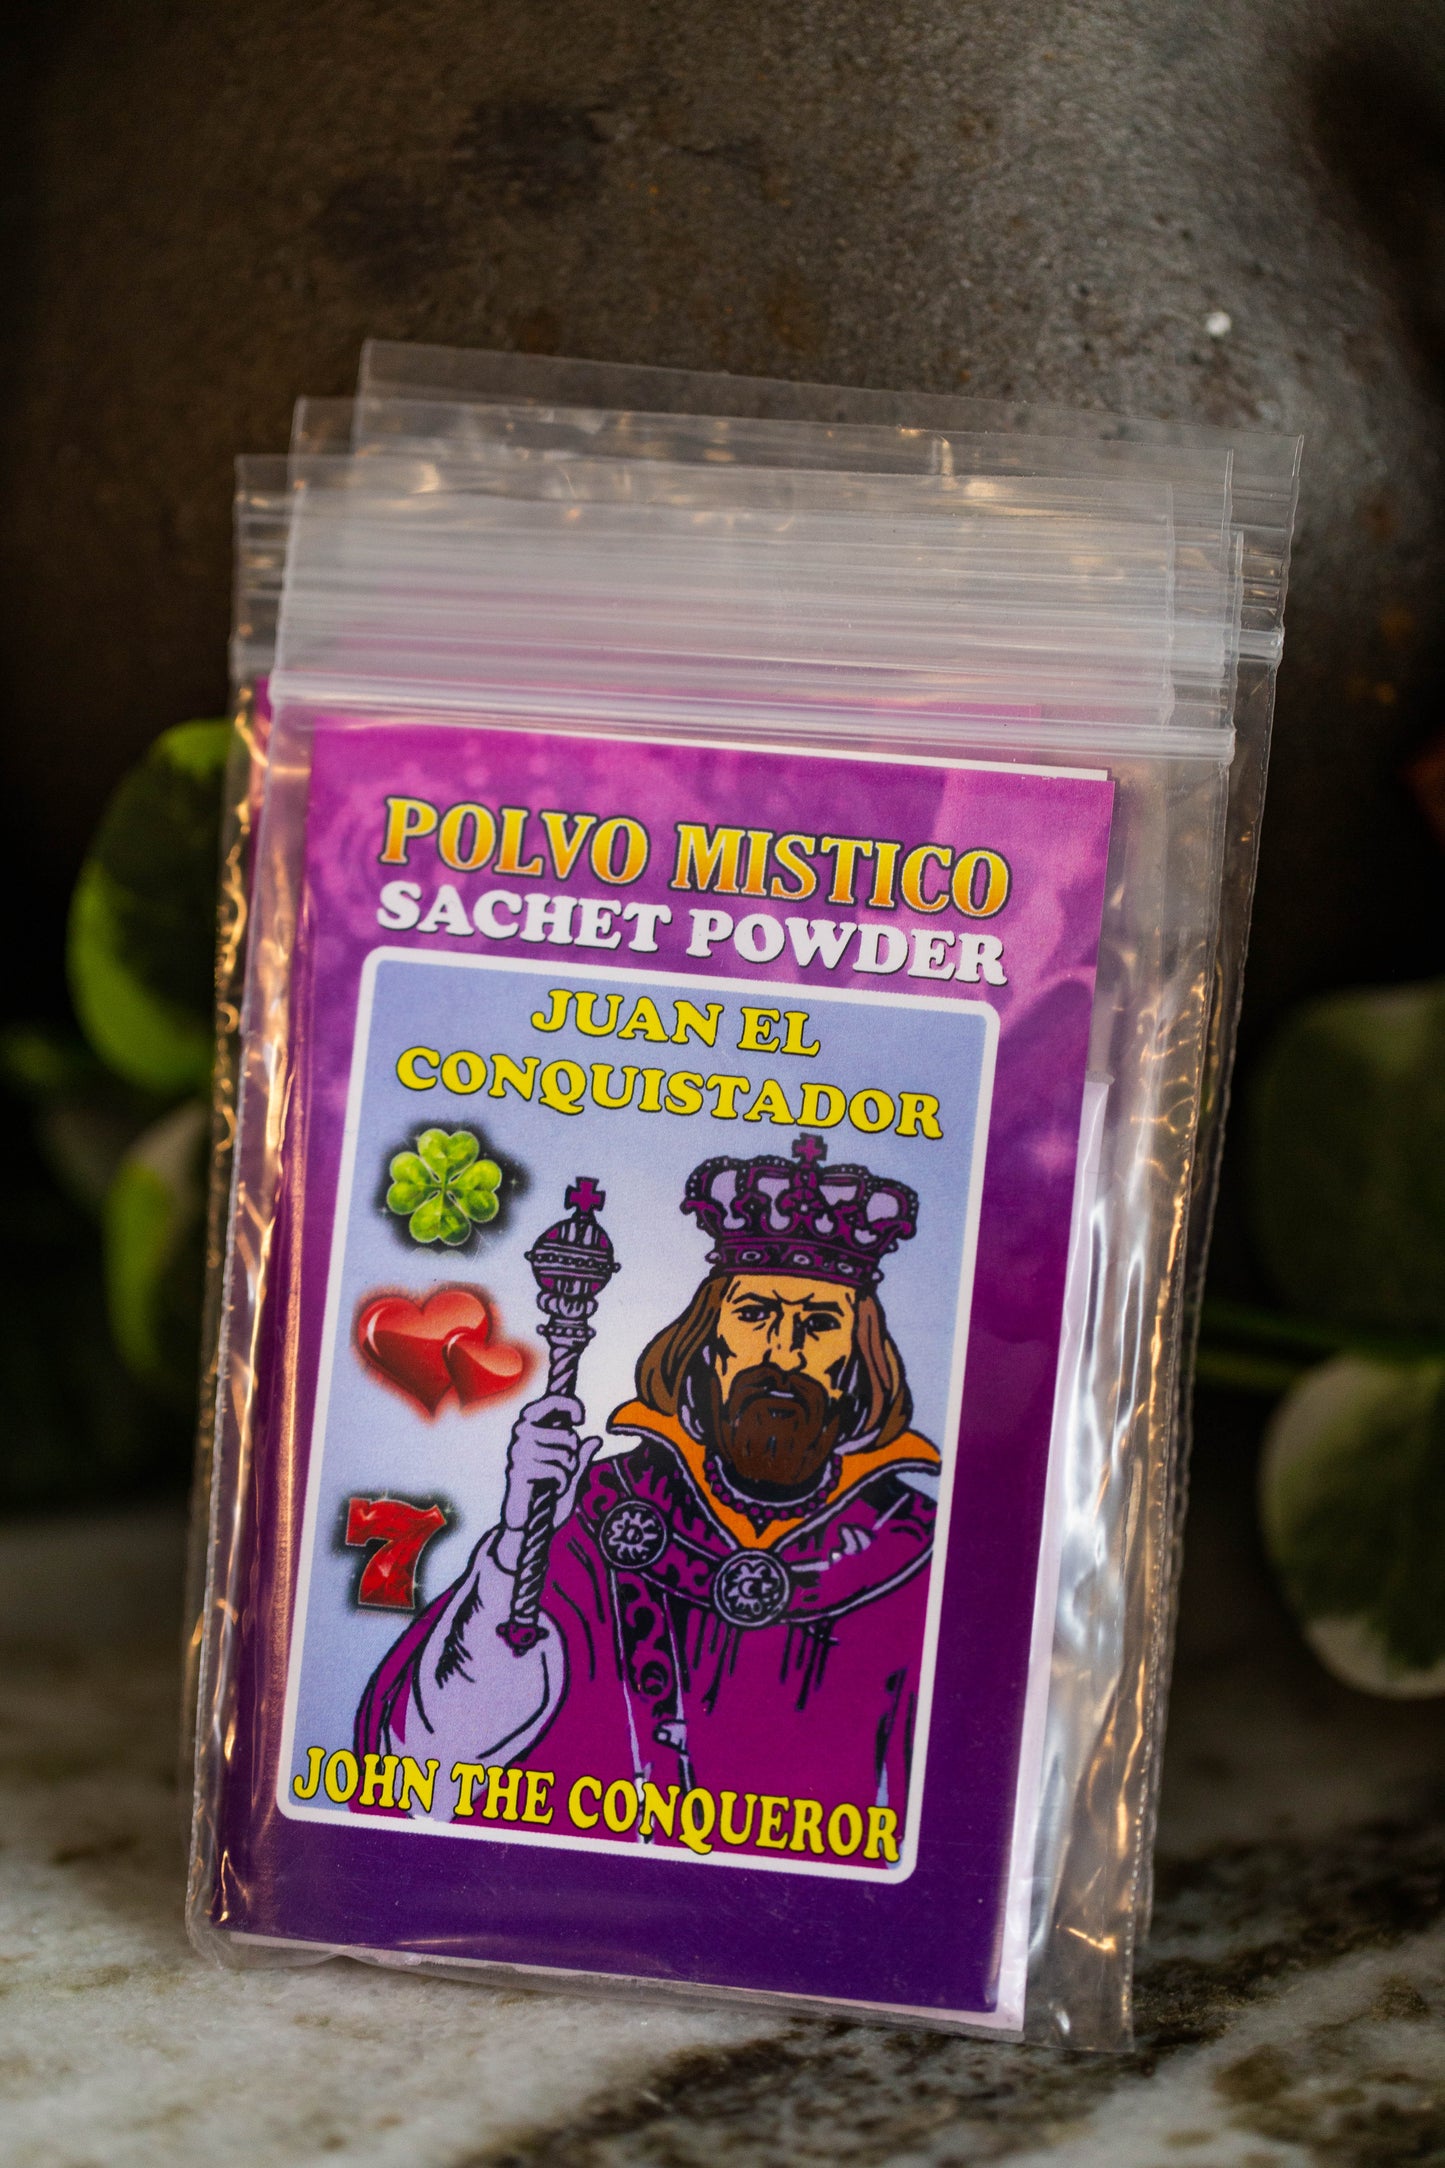 Polvo Mistico - JOHN THE CONQUERER - Sachet Powder for confidence, luck, overcoming obstacles, court cases